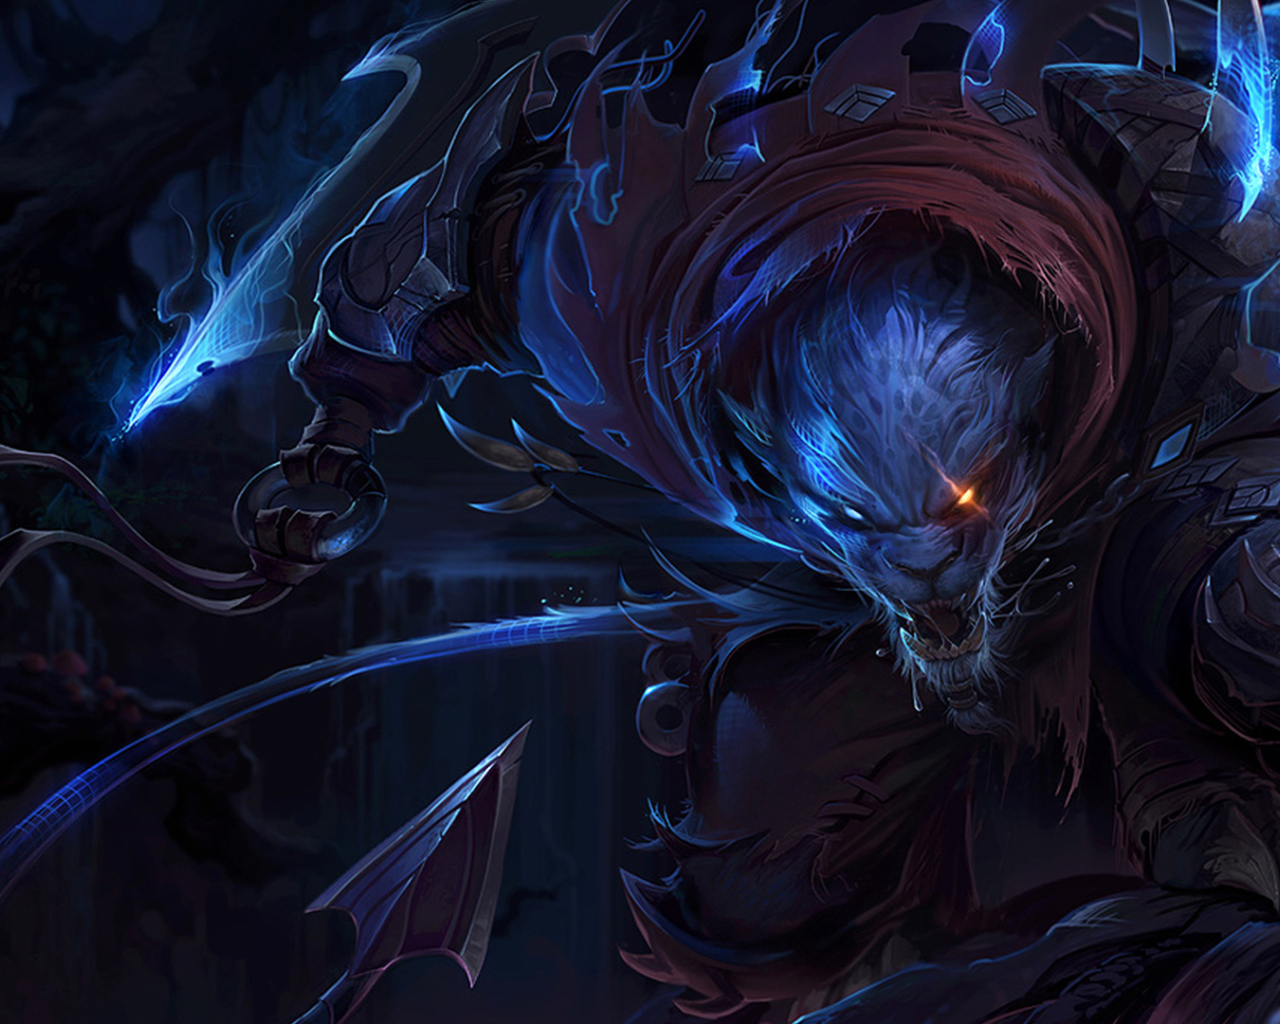 Rengar character in the game League of Legends